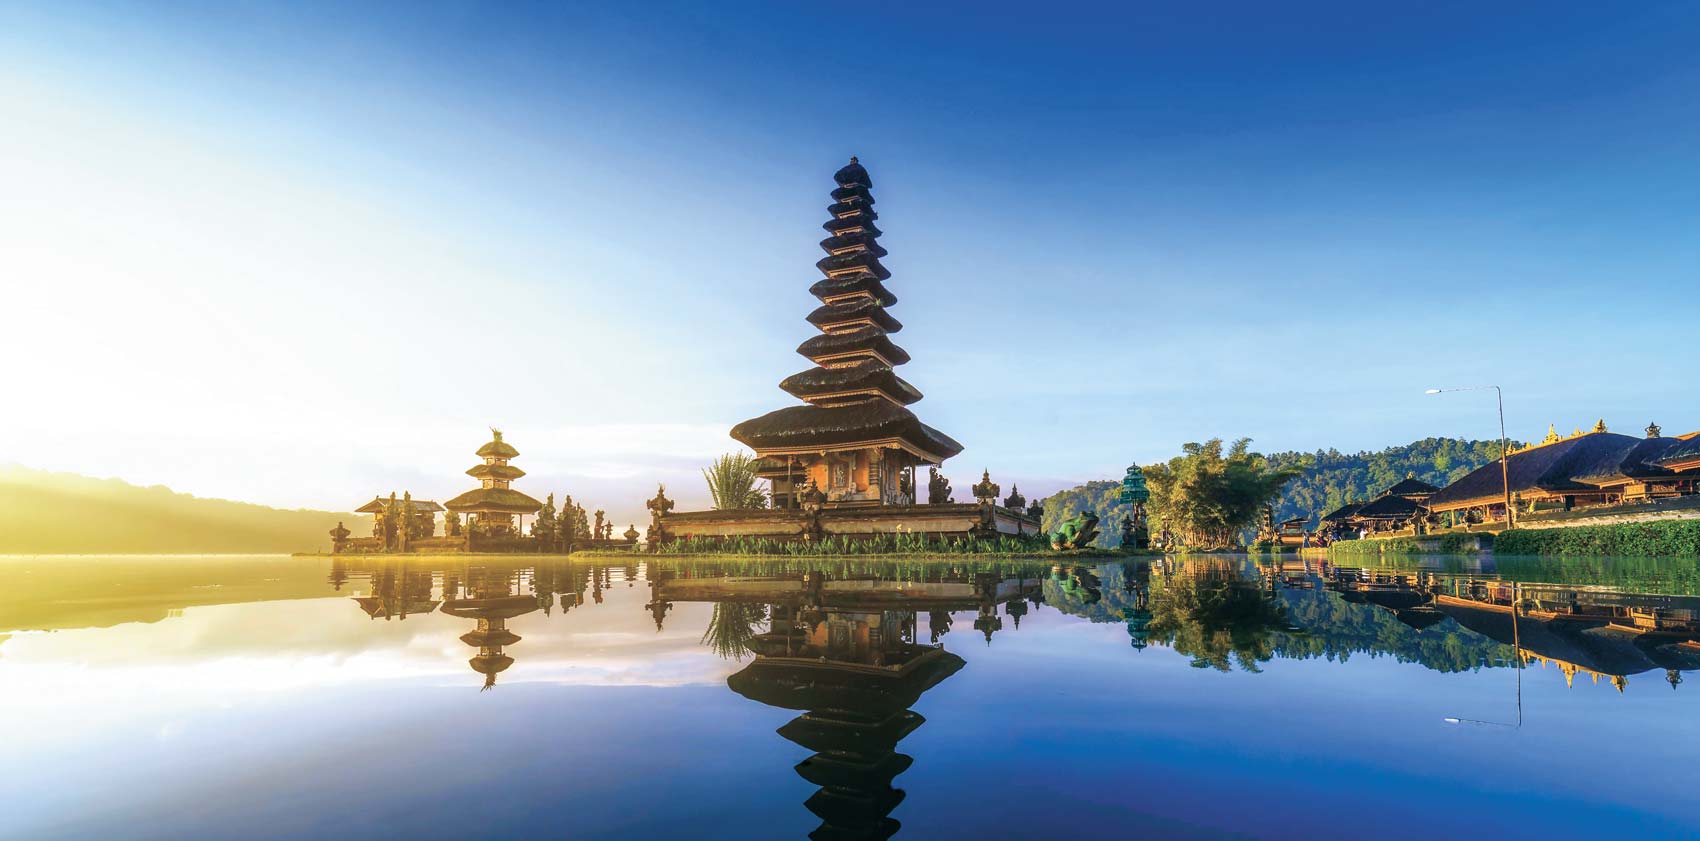 An ancient temple in Bali, Indonesia